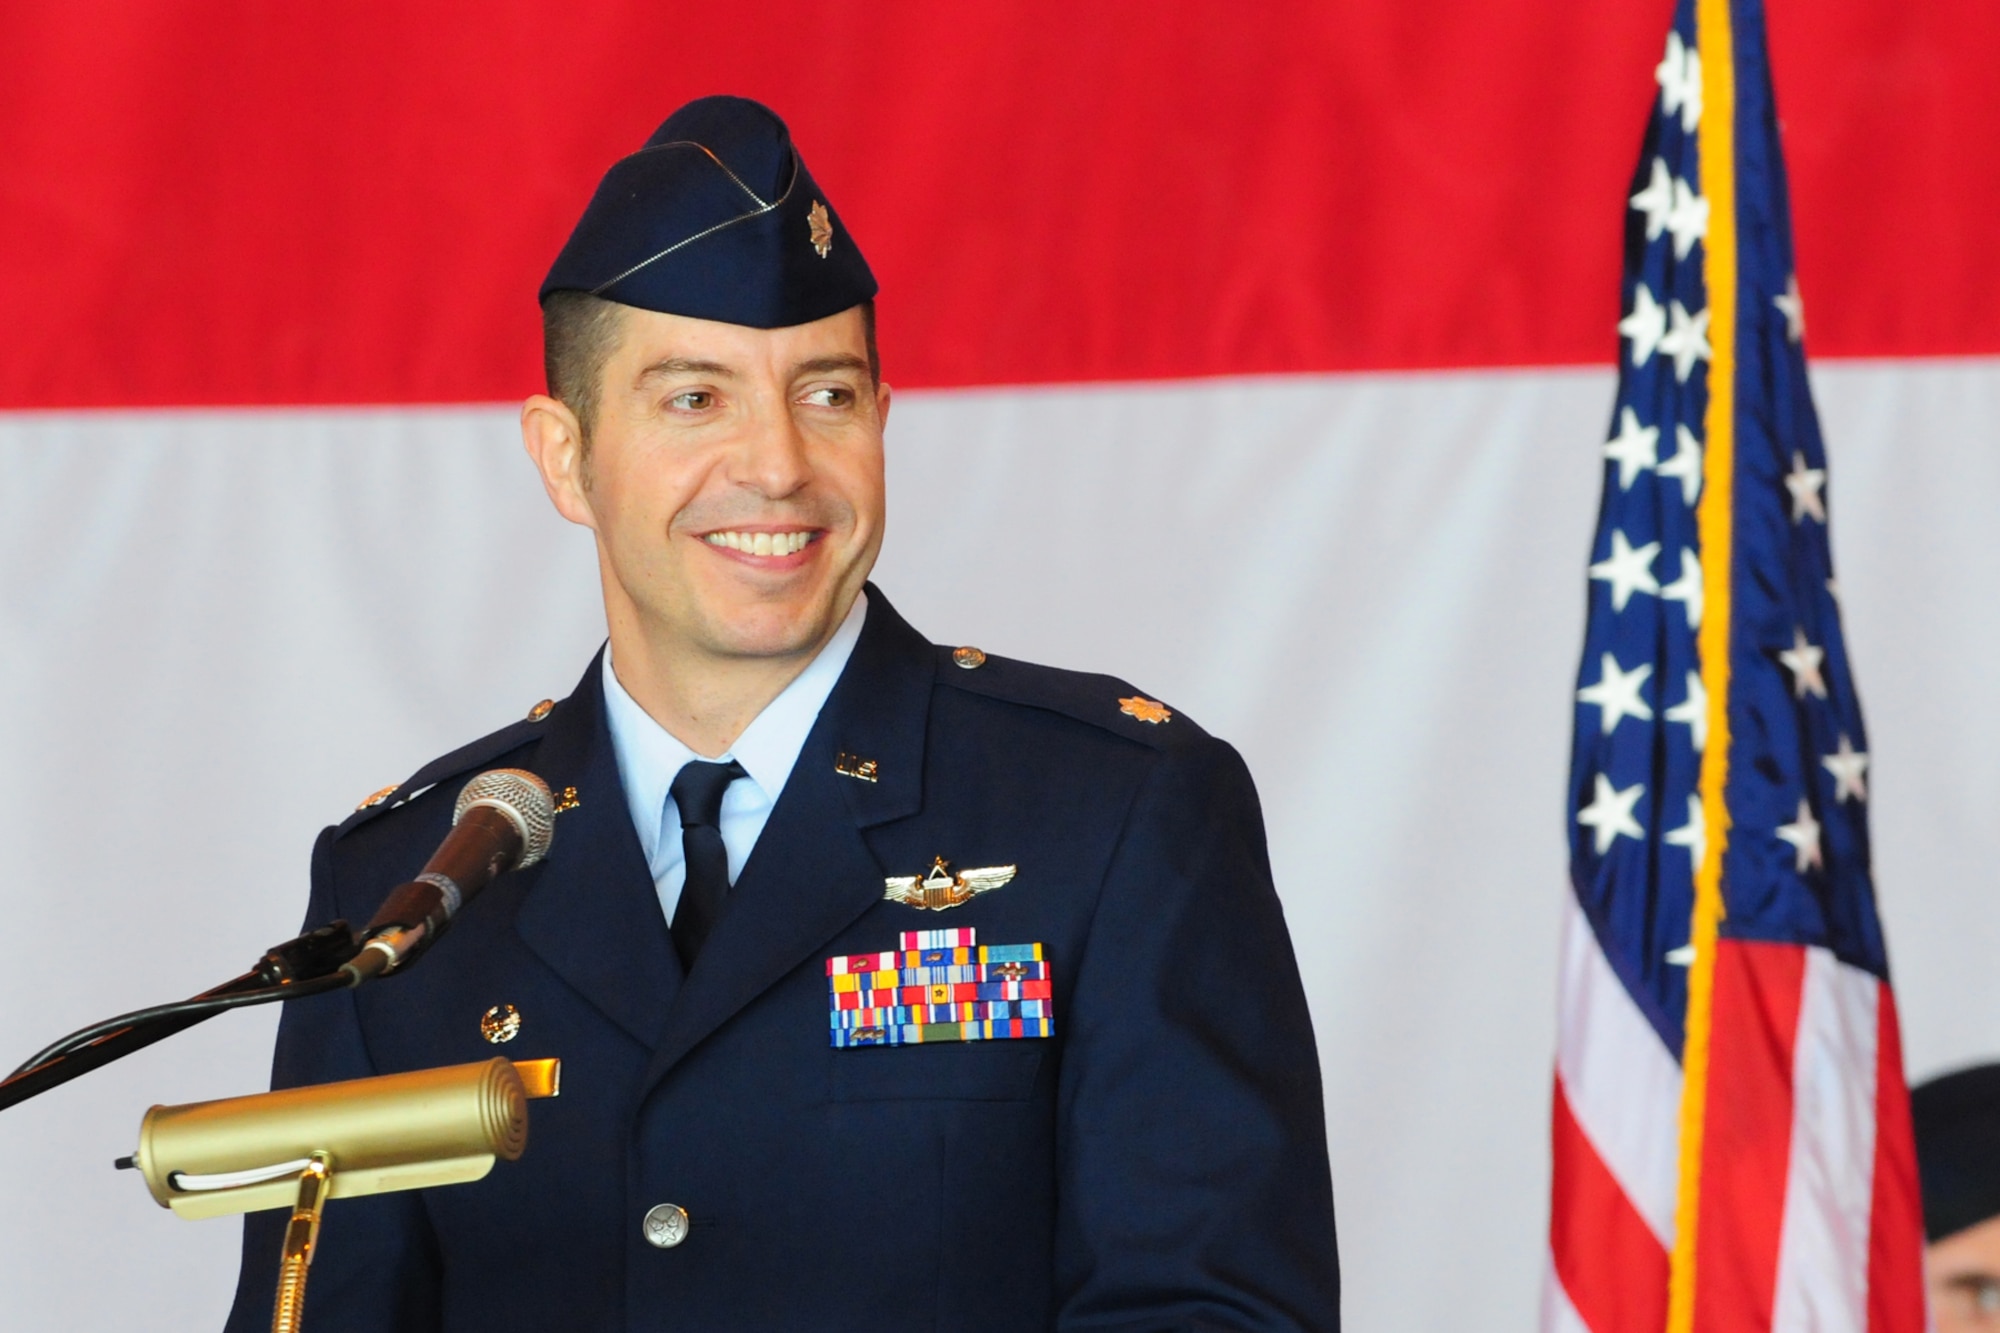 Lieutenant Col. Daniel E. Brant accepted command of the 966th Airborne Air Control Squadron from Lieutenant Col. Greg A. Kent in an official ceremony May 12.